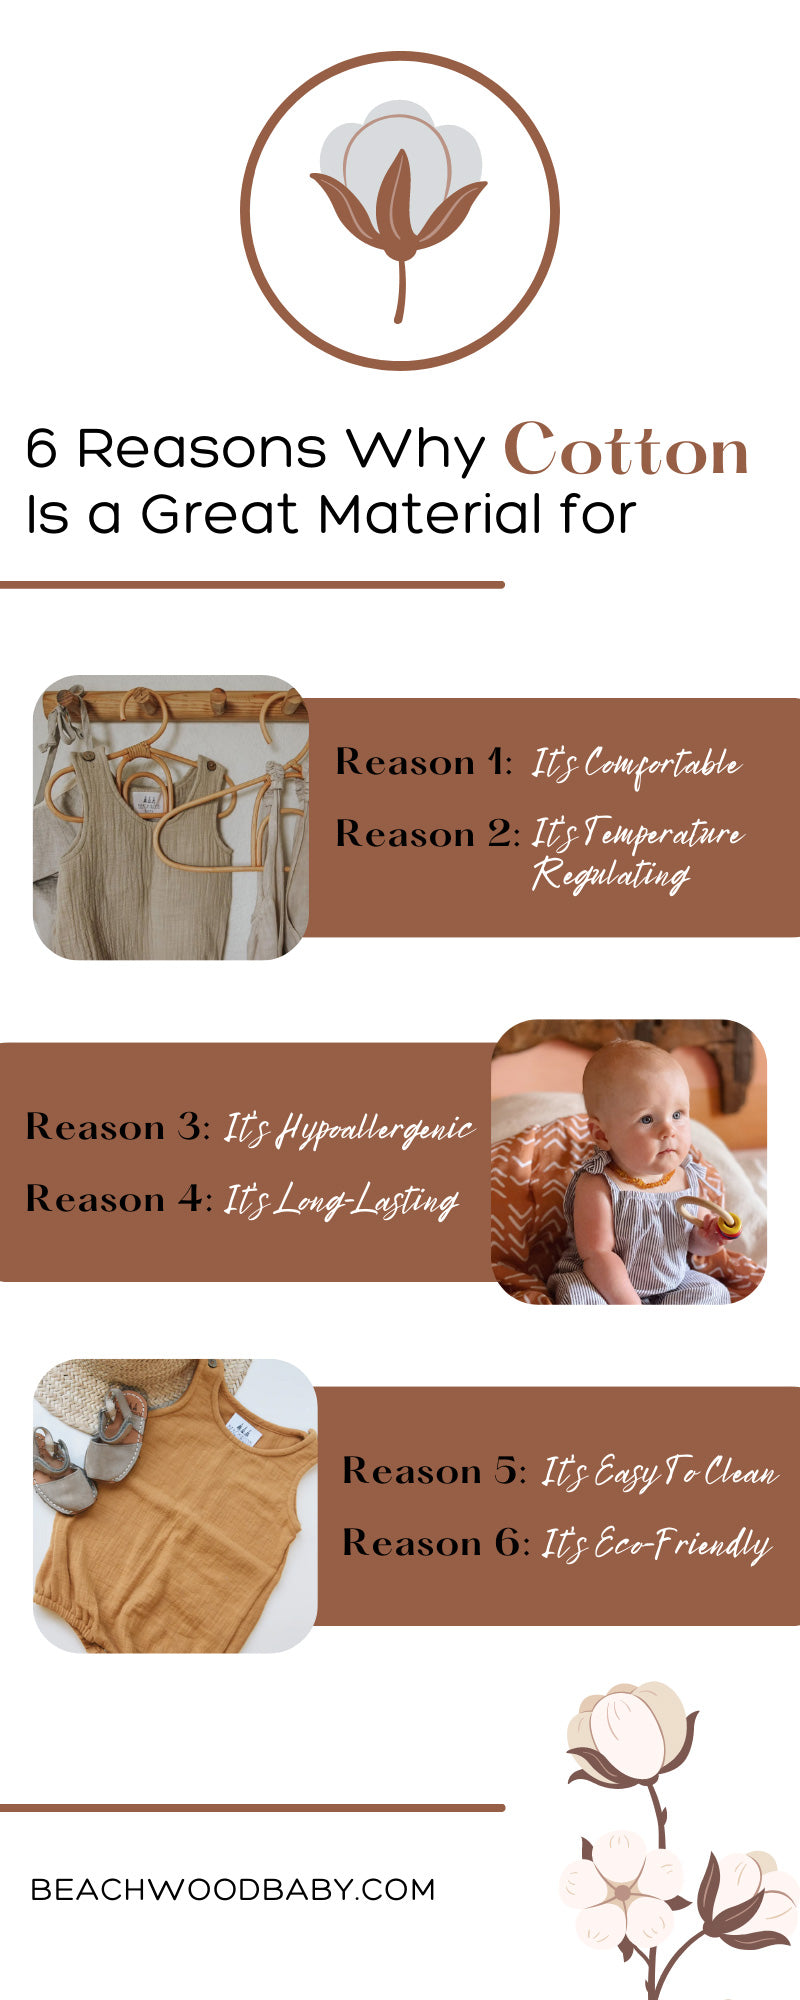 6 Reasons Why Cotton Is a Great Material for Infant Clothes